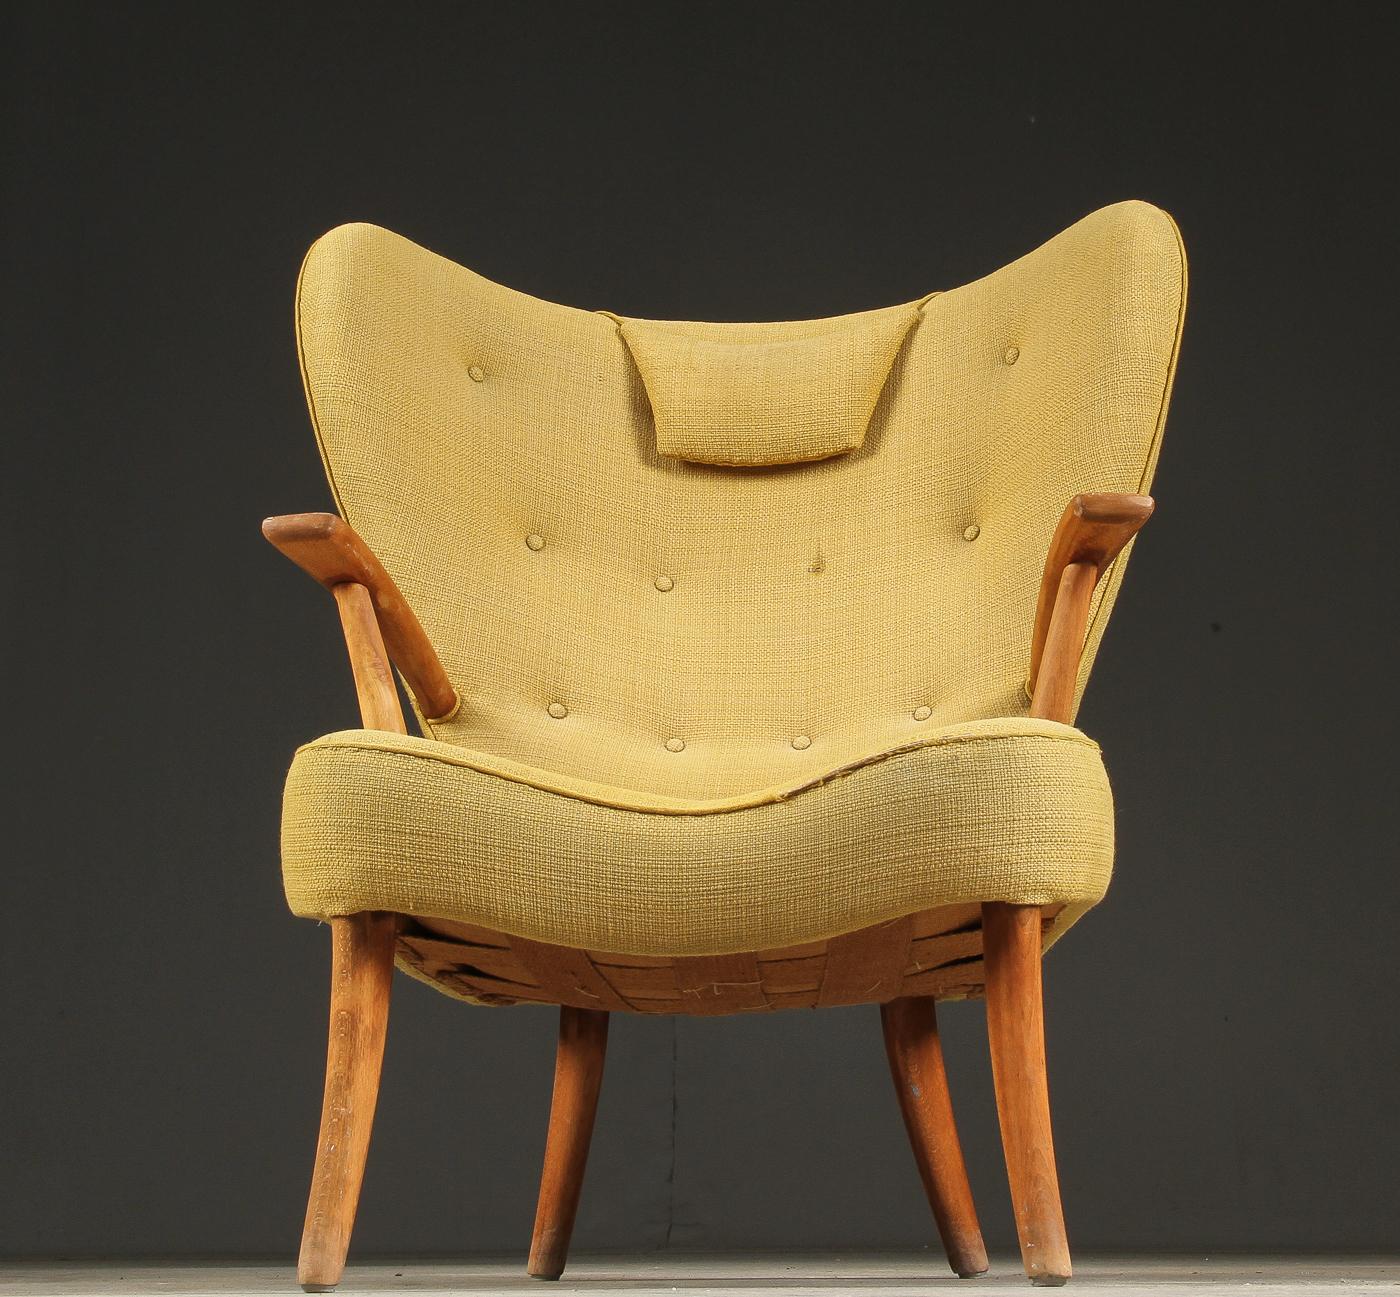 Sculptural lounge chair with beech, back, neck pillow and seat cushion upholstered in yellow upholstery fabric. Designed in 1954 by Ib Madsen & Acton Schubell, Rungsted (Copenhagen) Denmark. The chair comes with slight patina. At an additional cost,